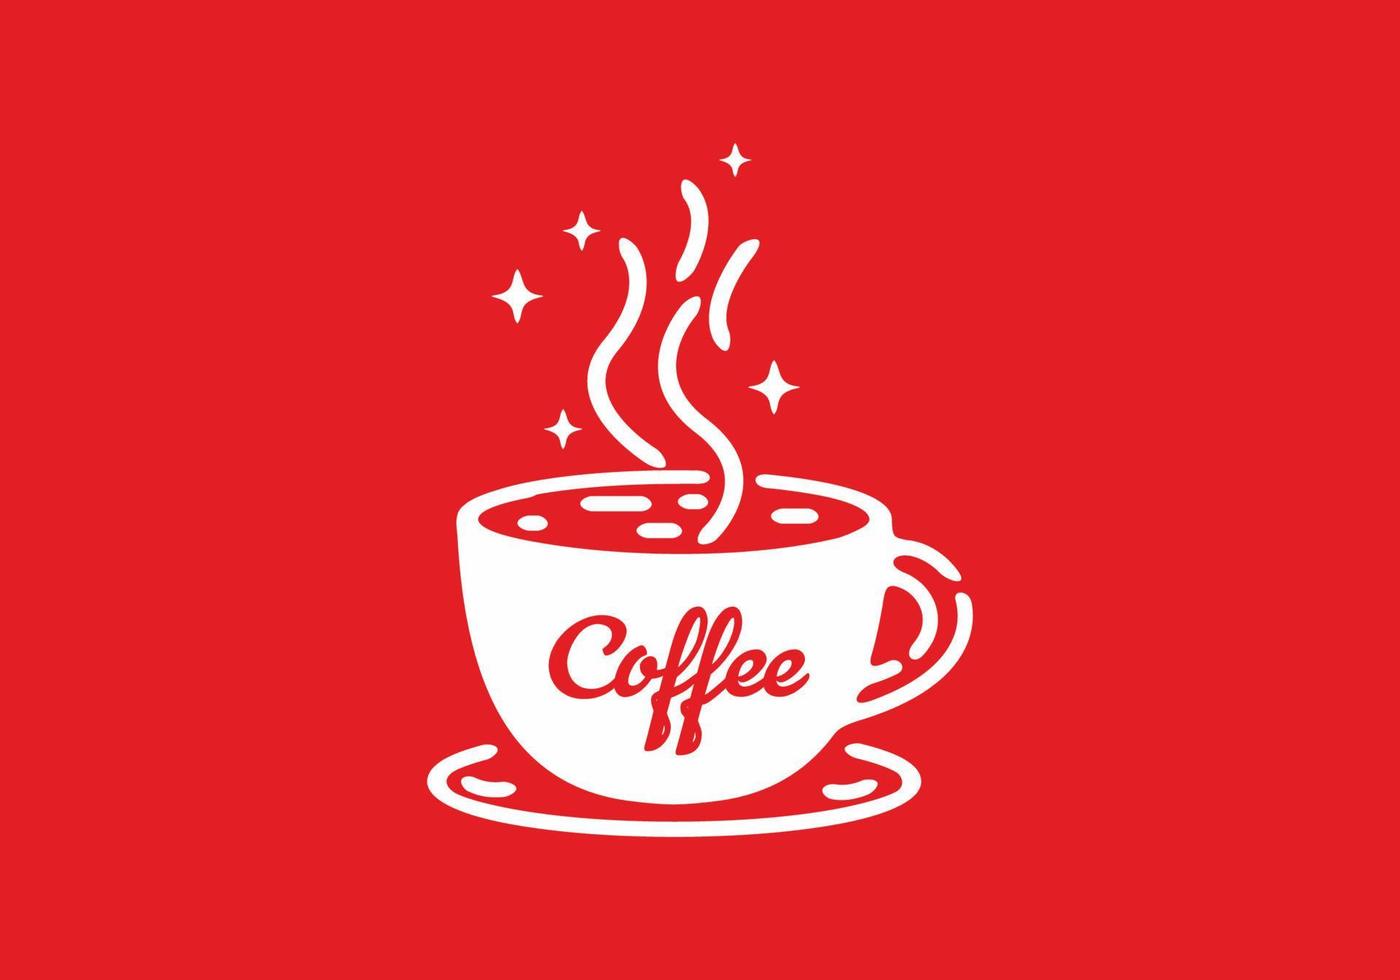 Red and white coffee cup illustration vector